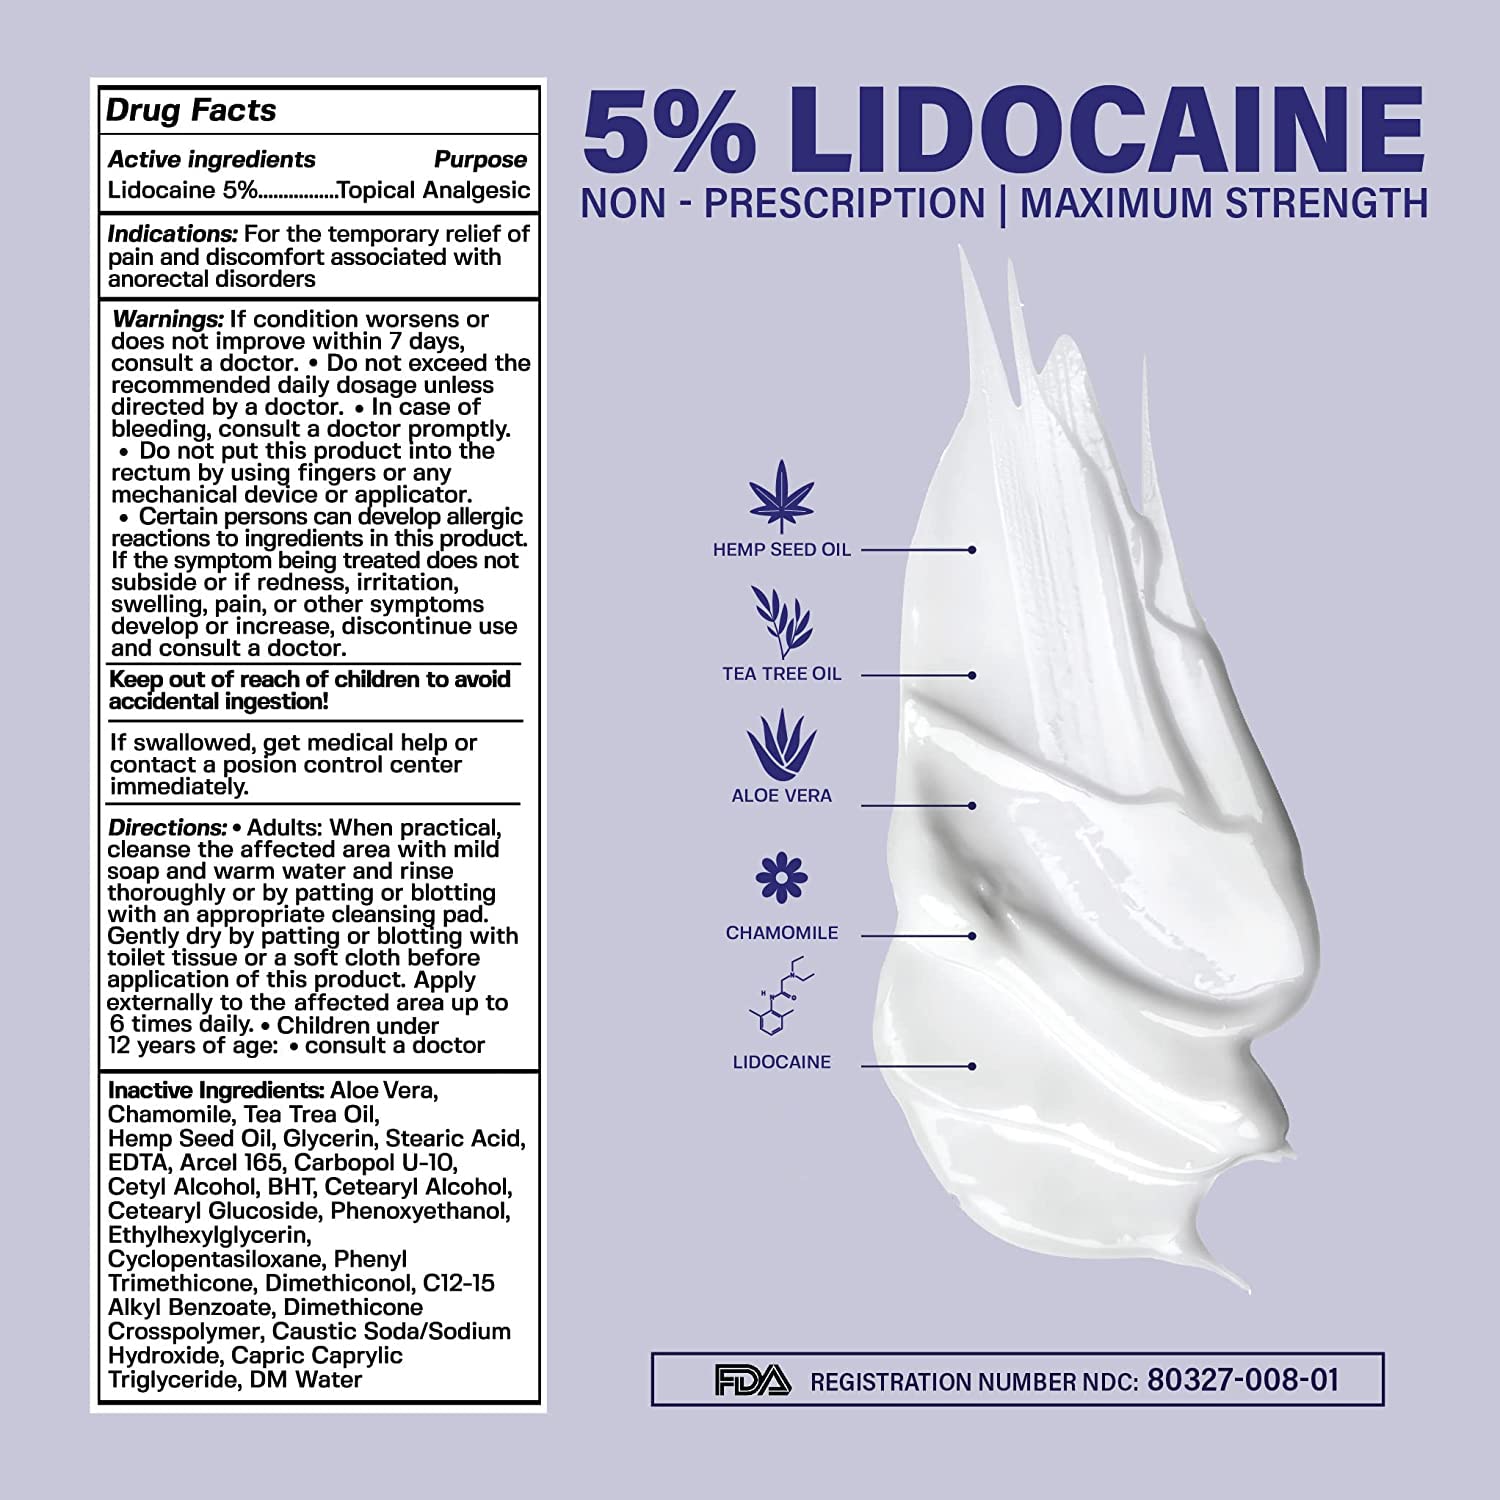 Base Labs 5% Lidocaine Numbing Cream for Tattoos, Piercings, Waxing - 4 FL oz - Tattoo Numbing Cream, Topical Anesthetic Cream I Numb Gel Brazilian, Microneedling, Microblading Lip Injections I 120ML